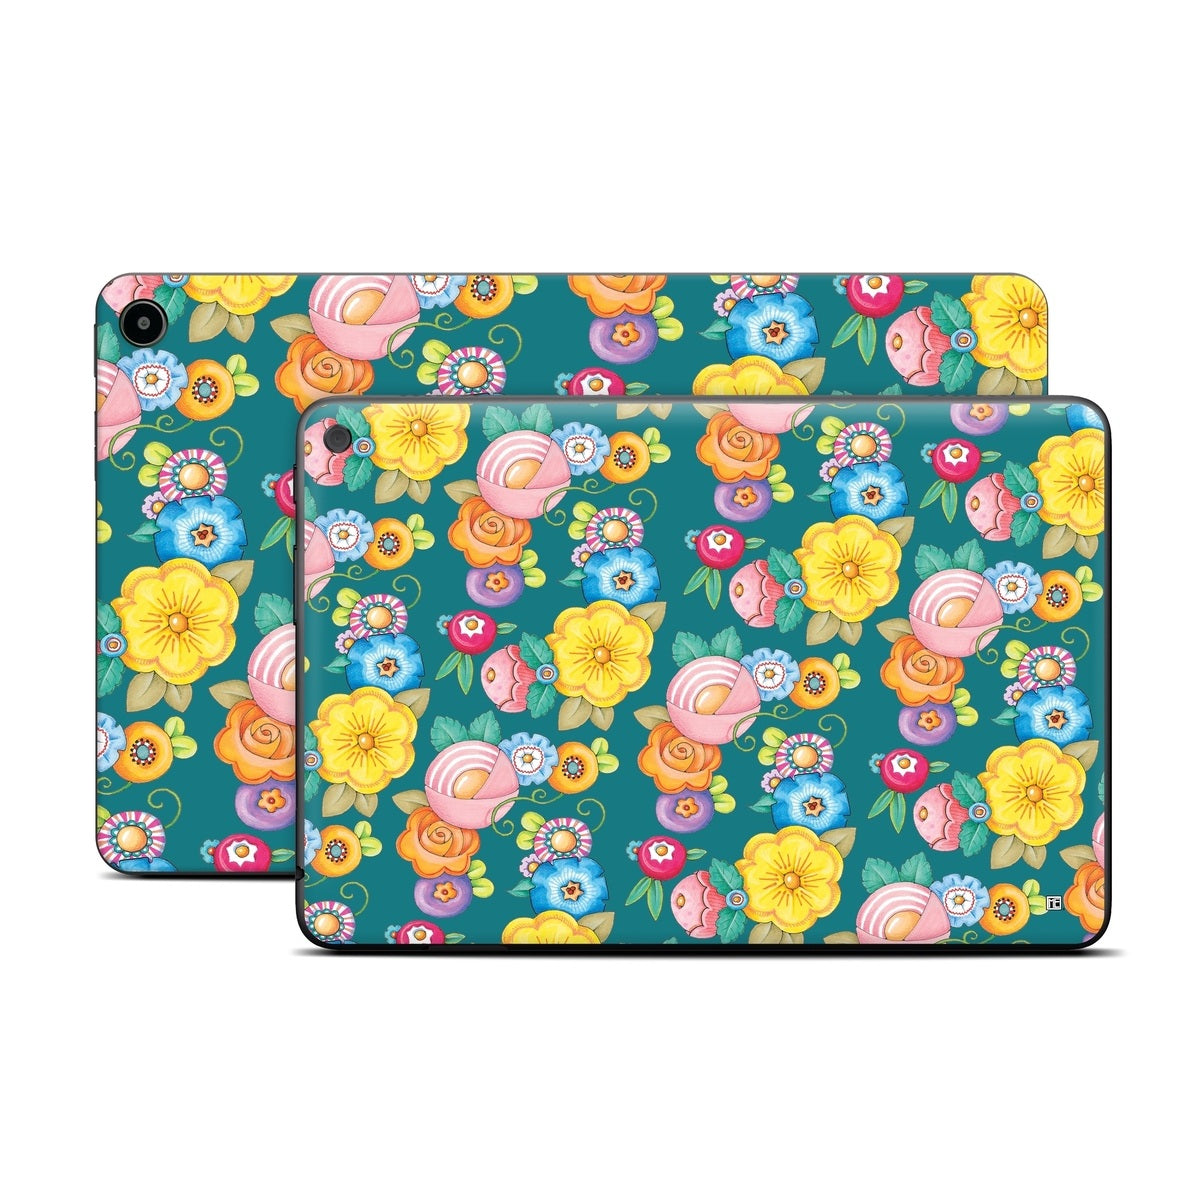 Act Right Flowers - Amazon Fire Skin